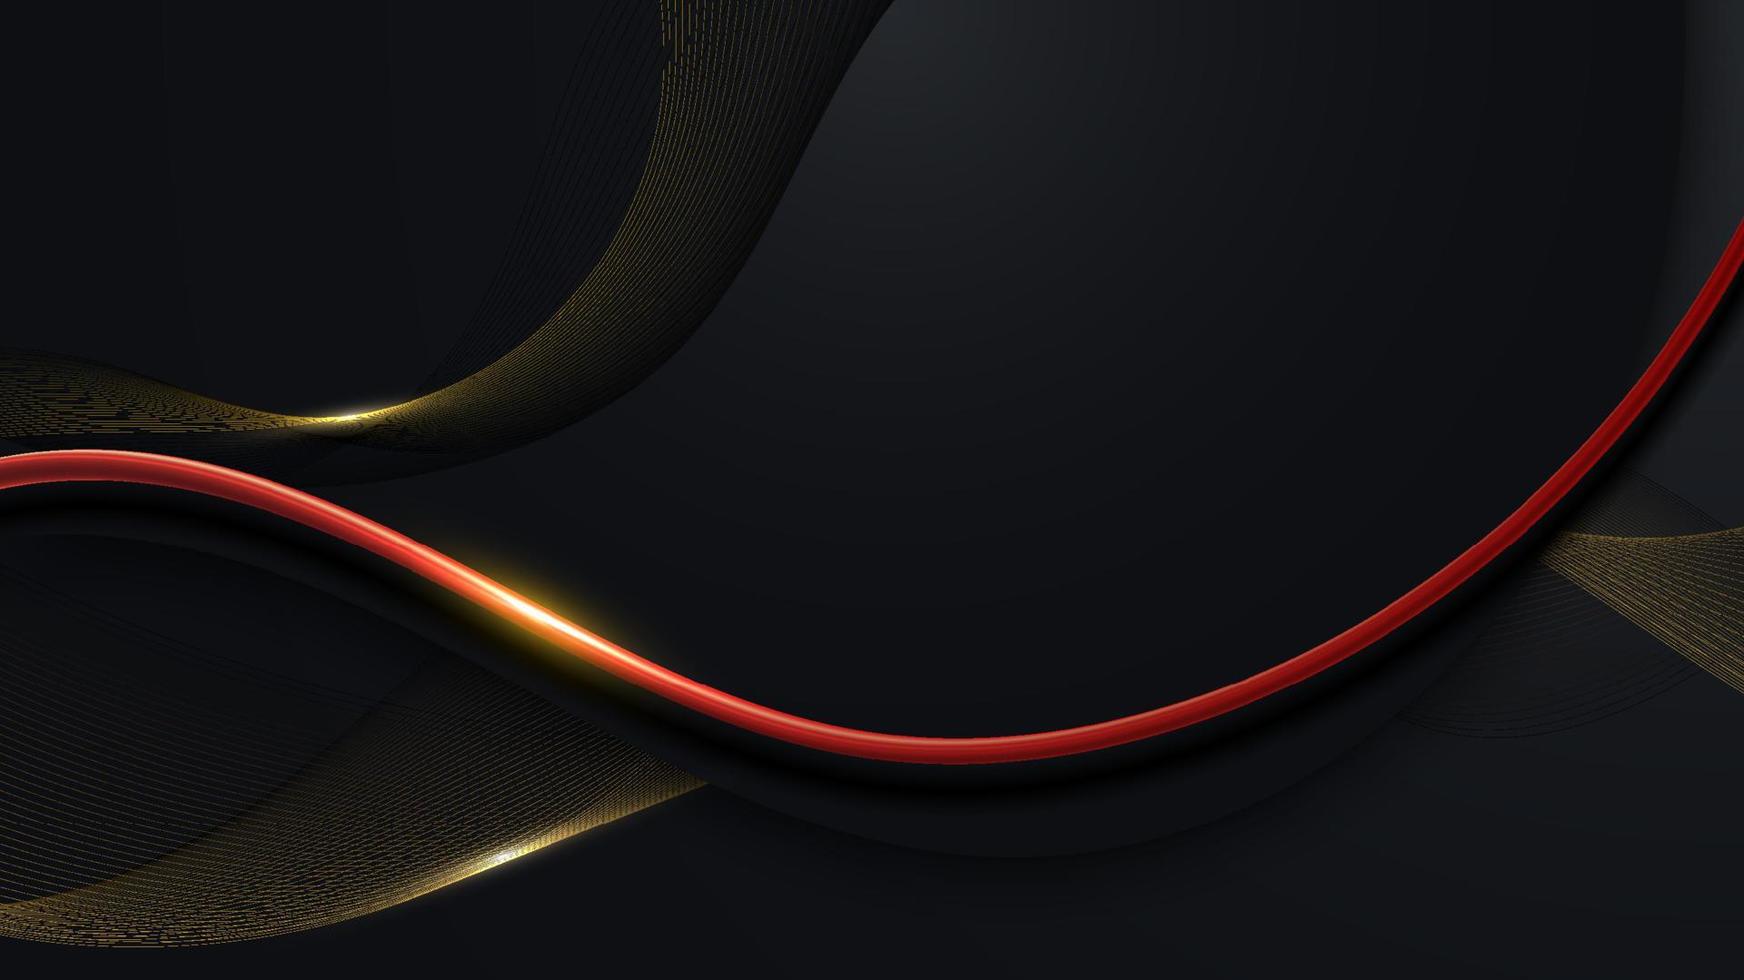 Abstract 3D luxury background black and golden wave lines with light effect red line elements vector